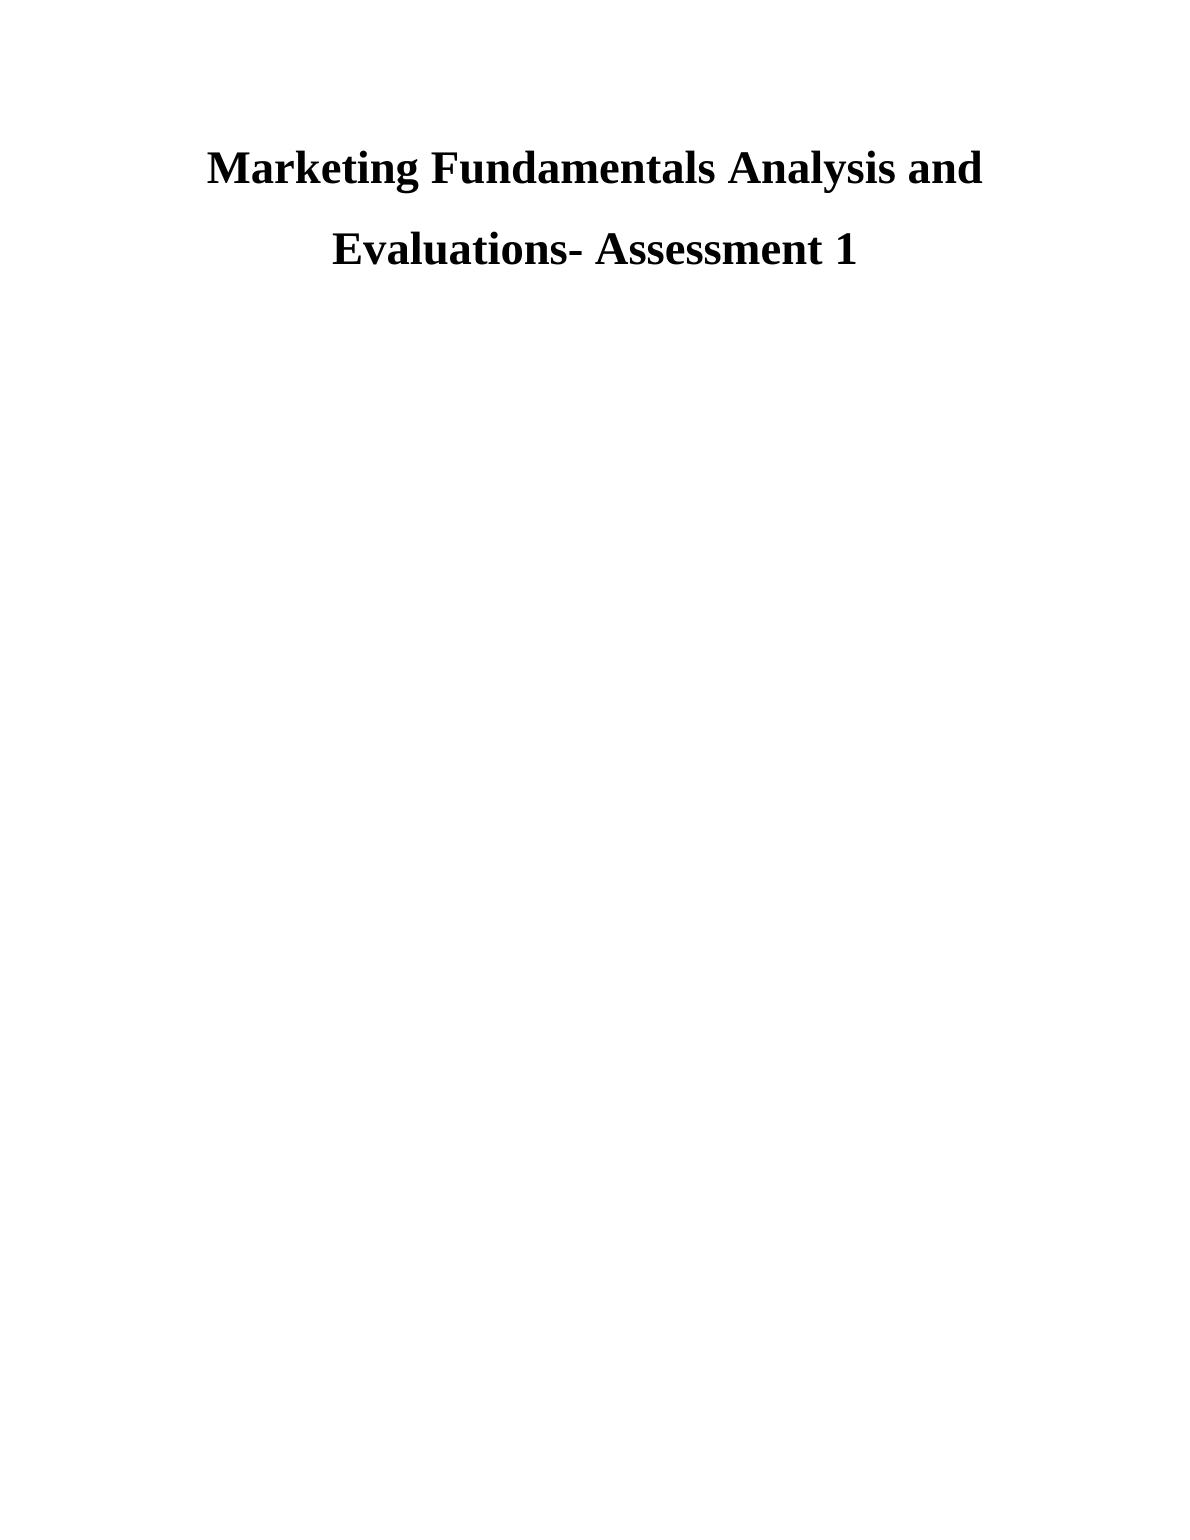 Marketing Fundamentals Analysis and Evaluations- Assessment 1_1